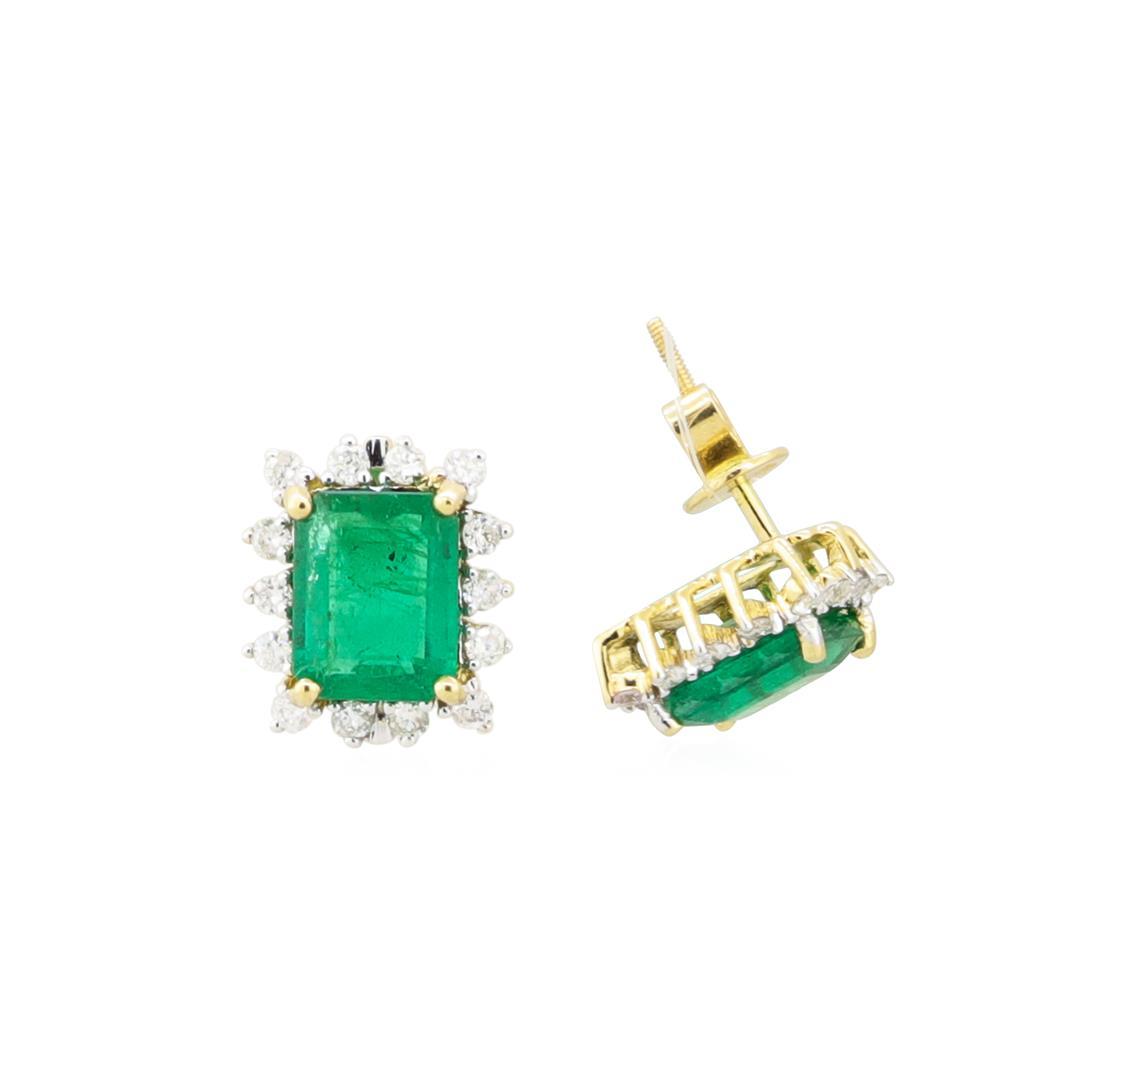 4.18 ctw Emerald and Diamond Earrings - 18KT Yellow Gold